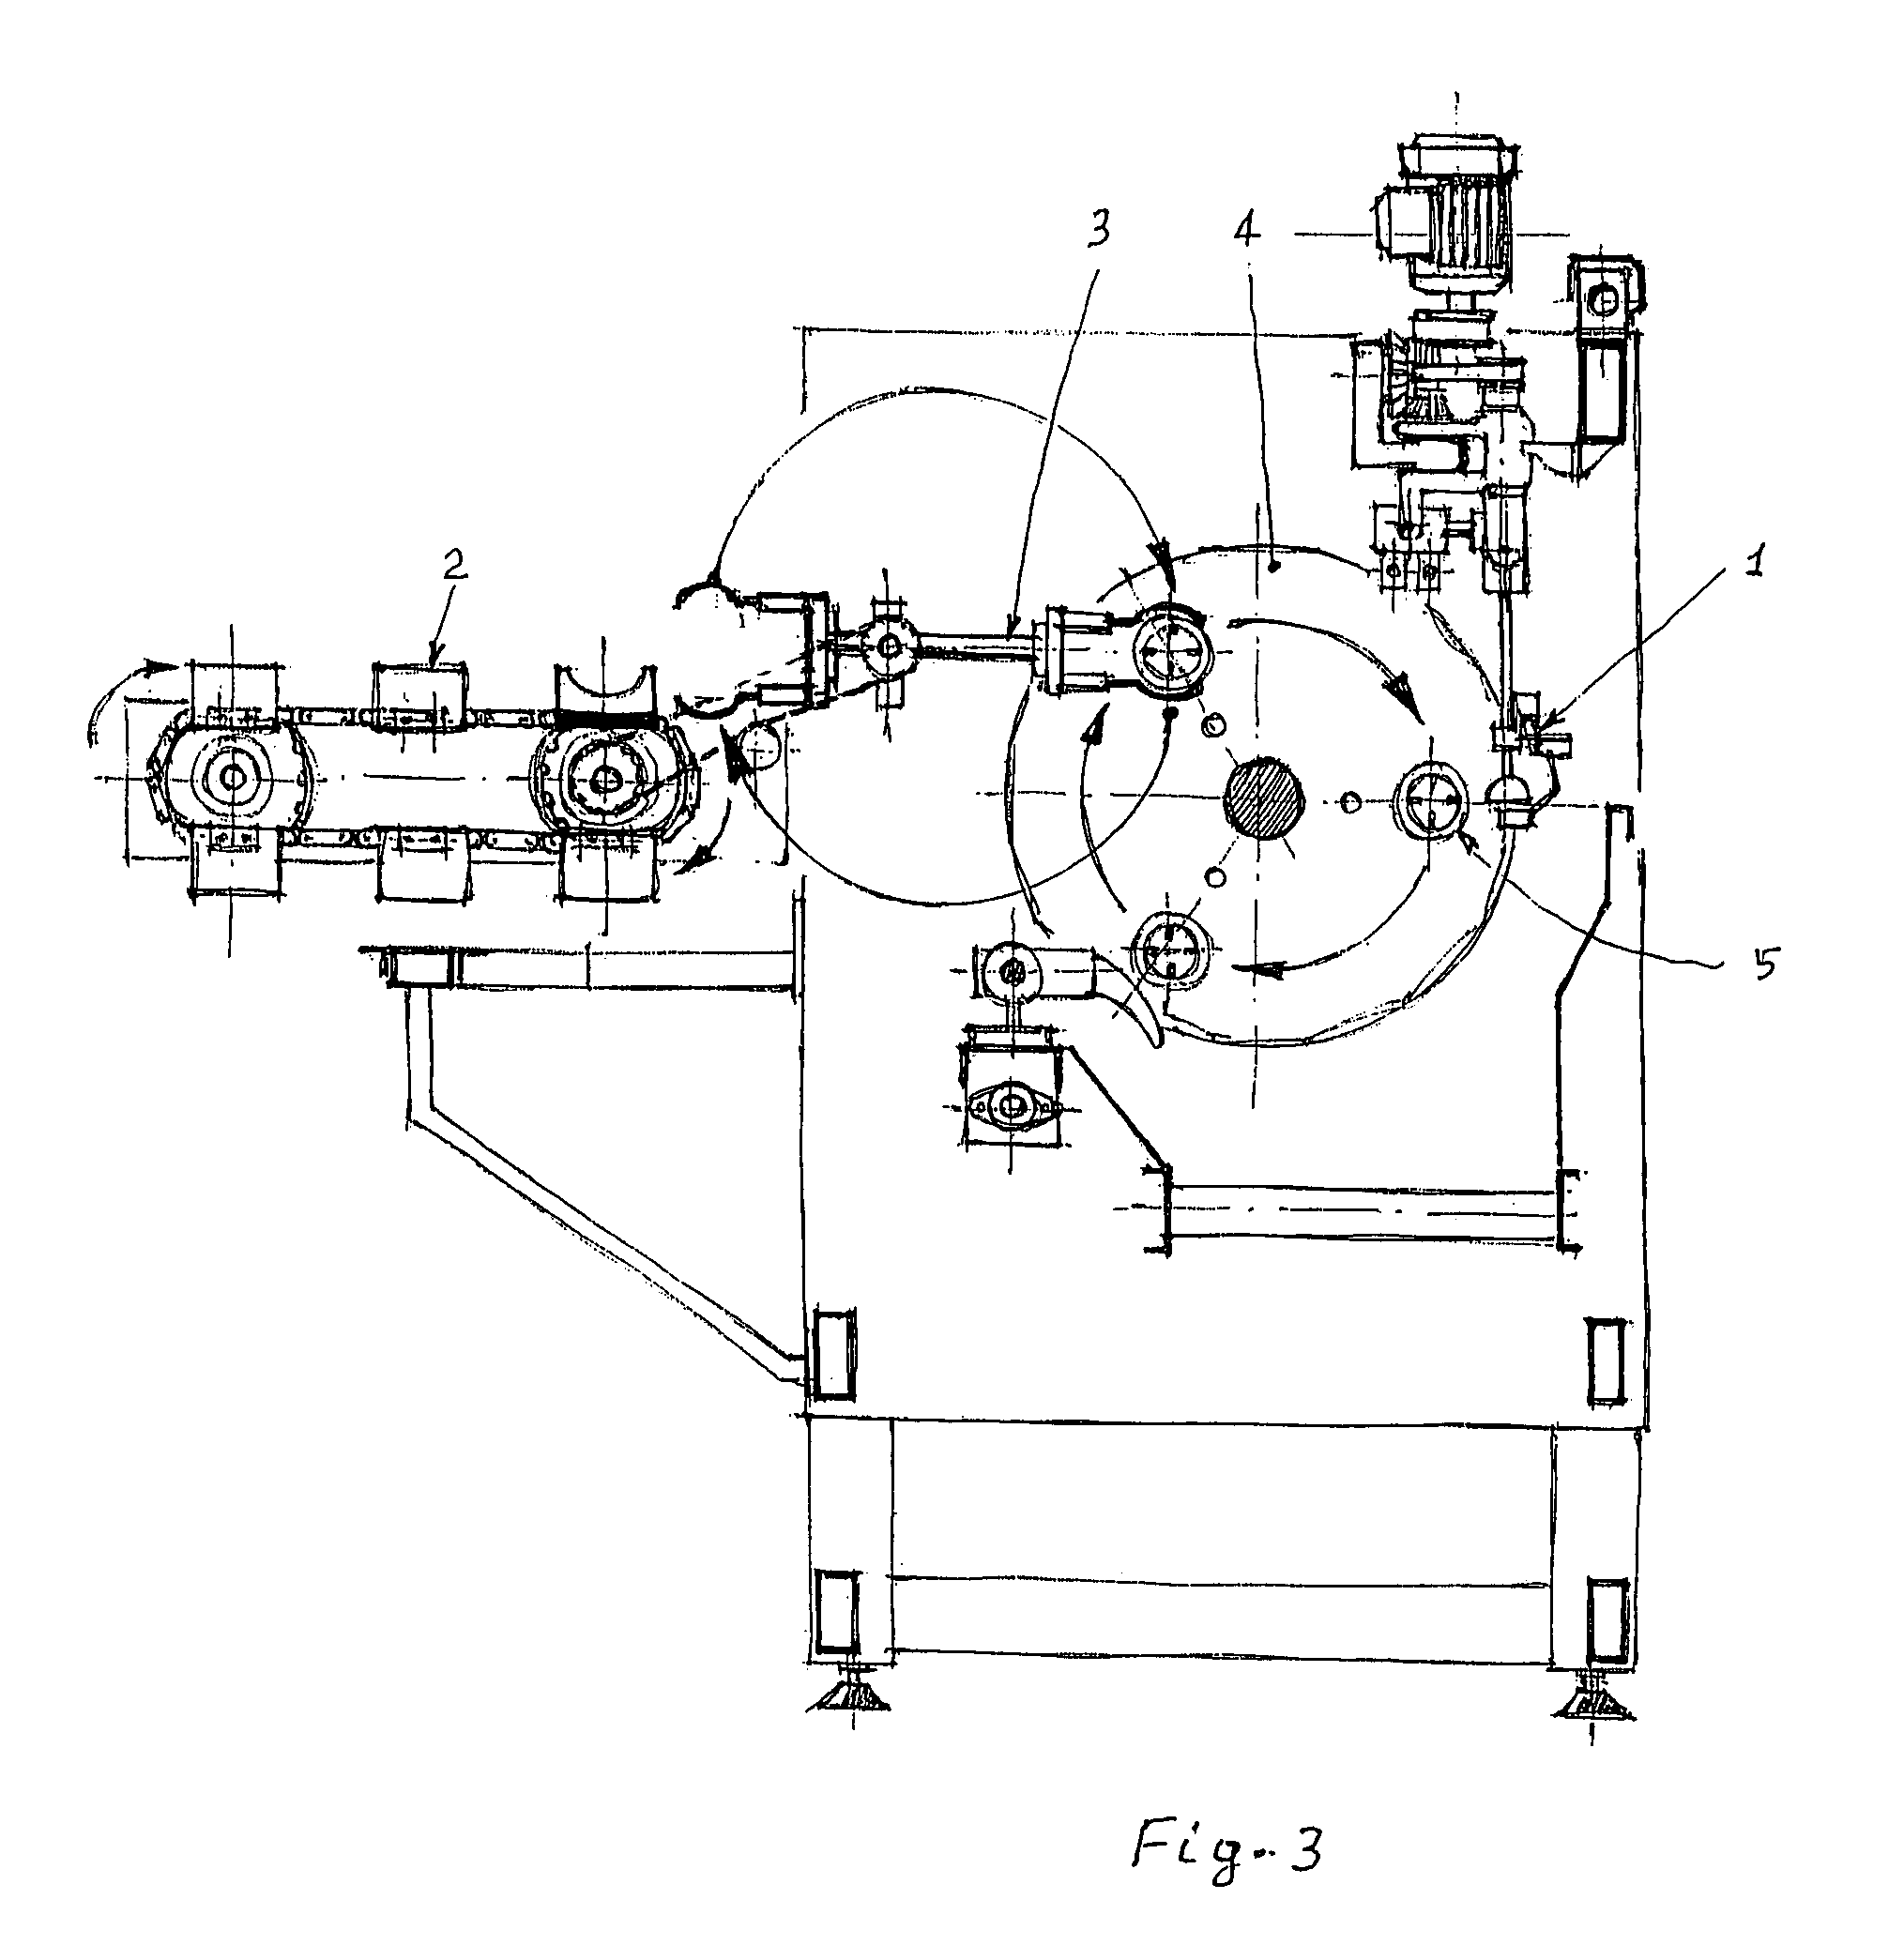 Device for peeling pulpy fruits, having an adjustable cutting depth